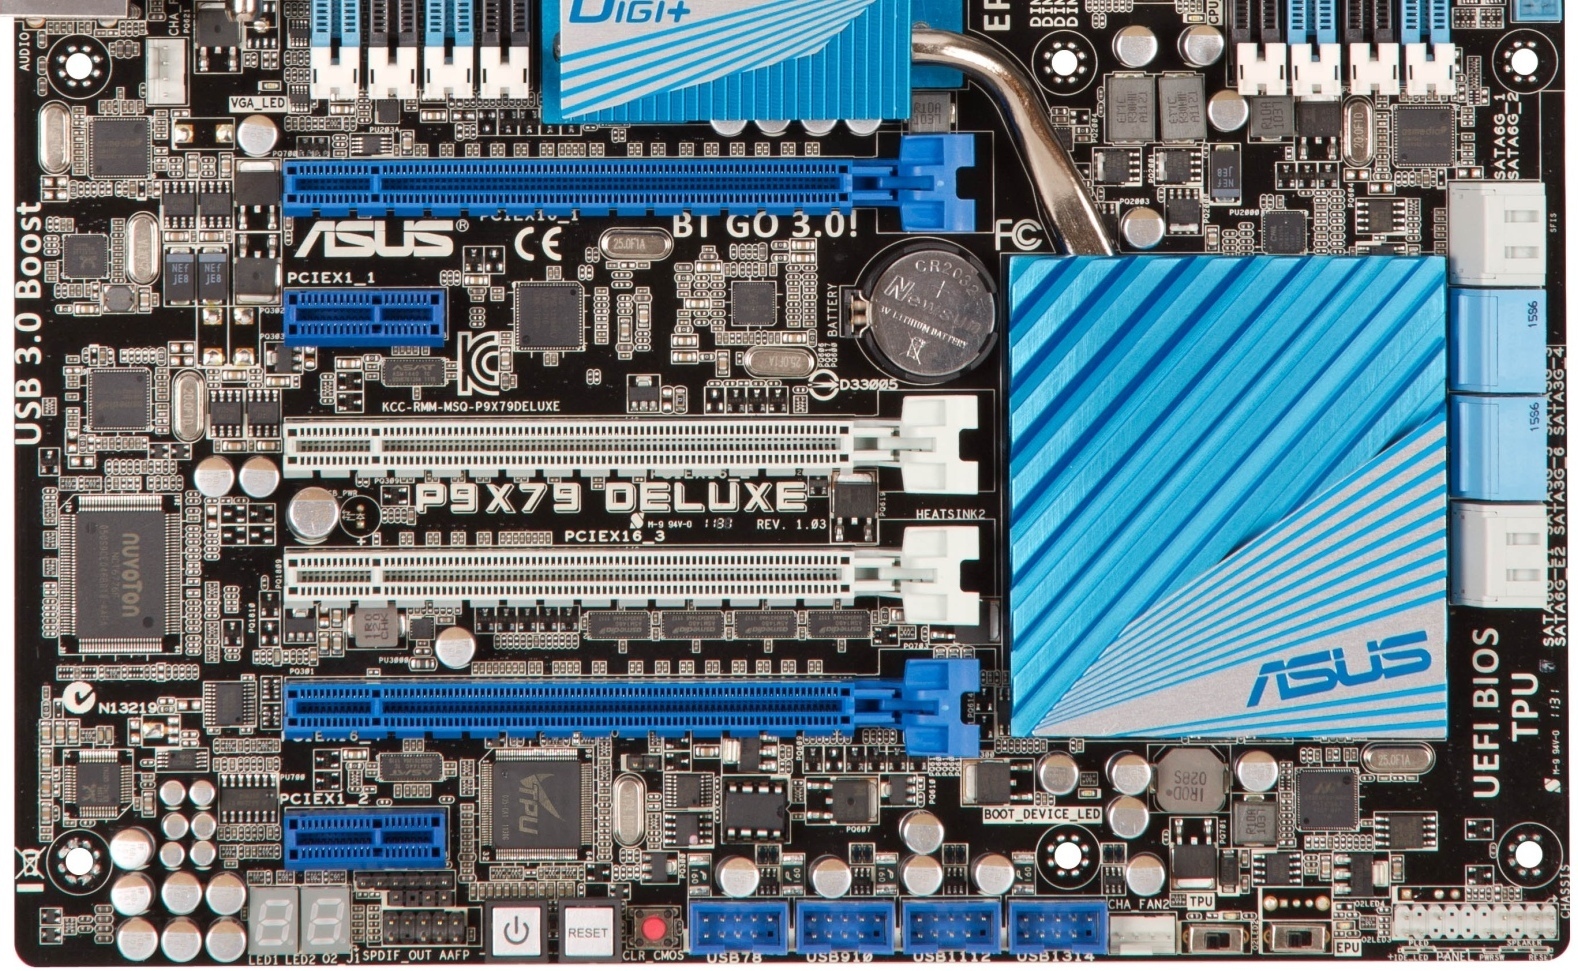 Is there AMD motherboard with 2 x PCIe 3.0 x16 slots and 3.0 x1 slots